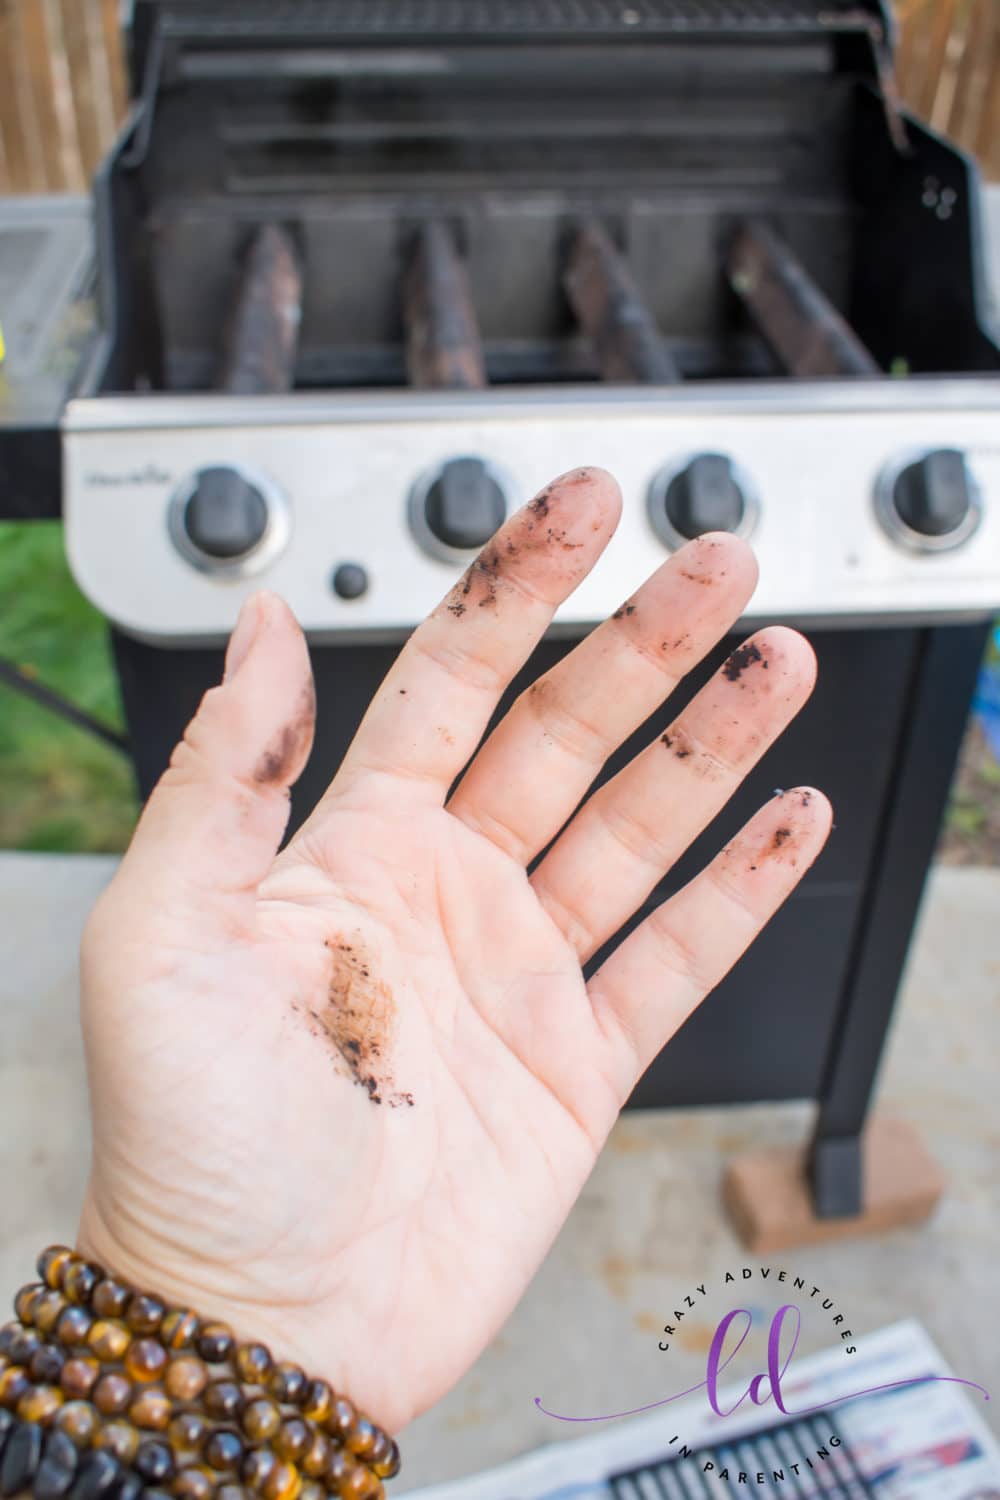 Messy Hands from Grill Grates